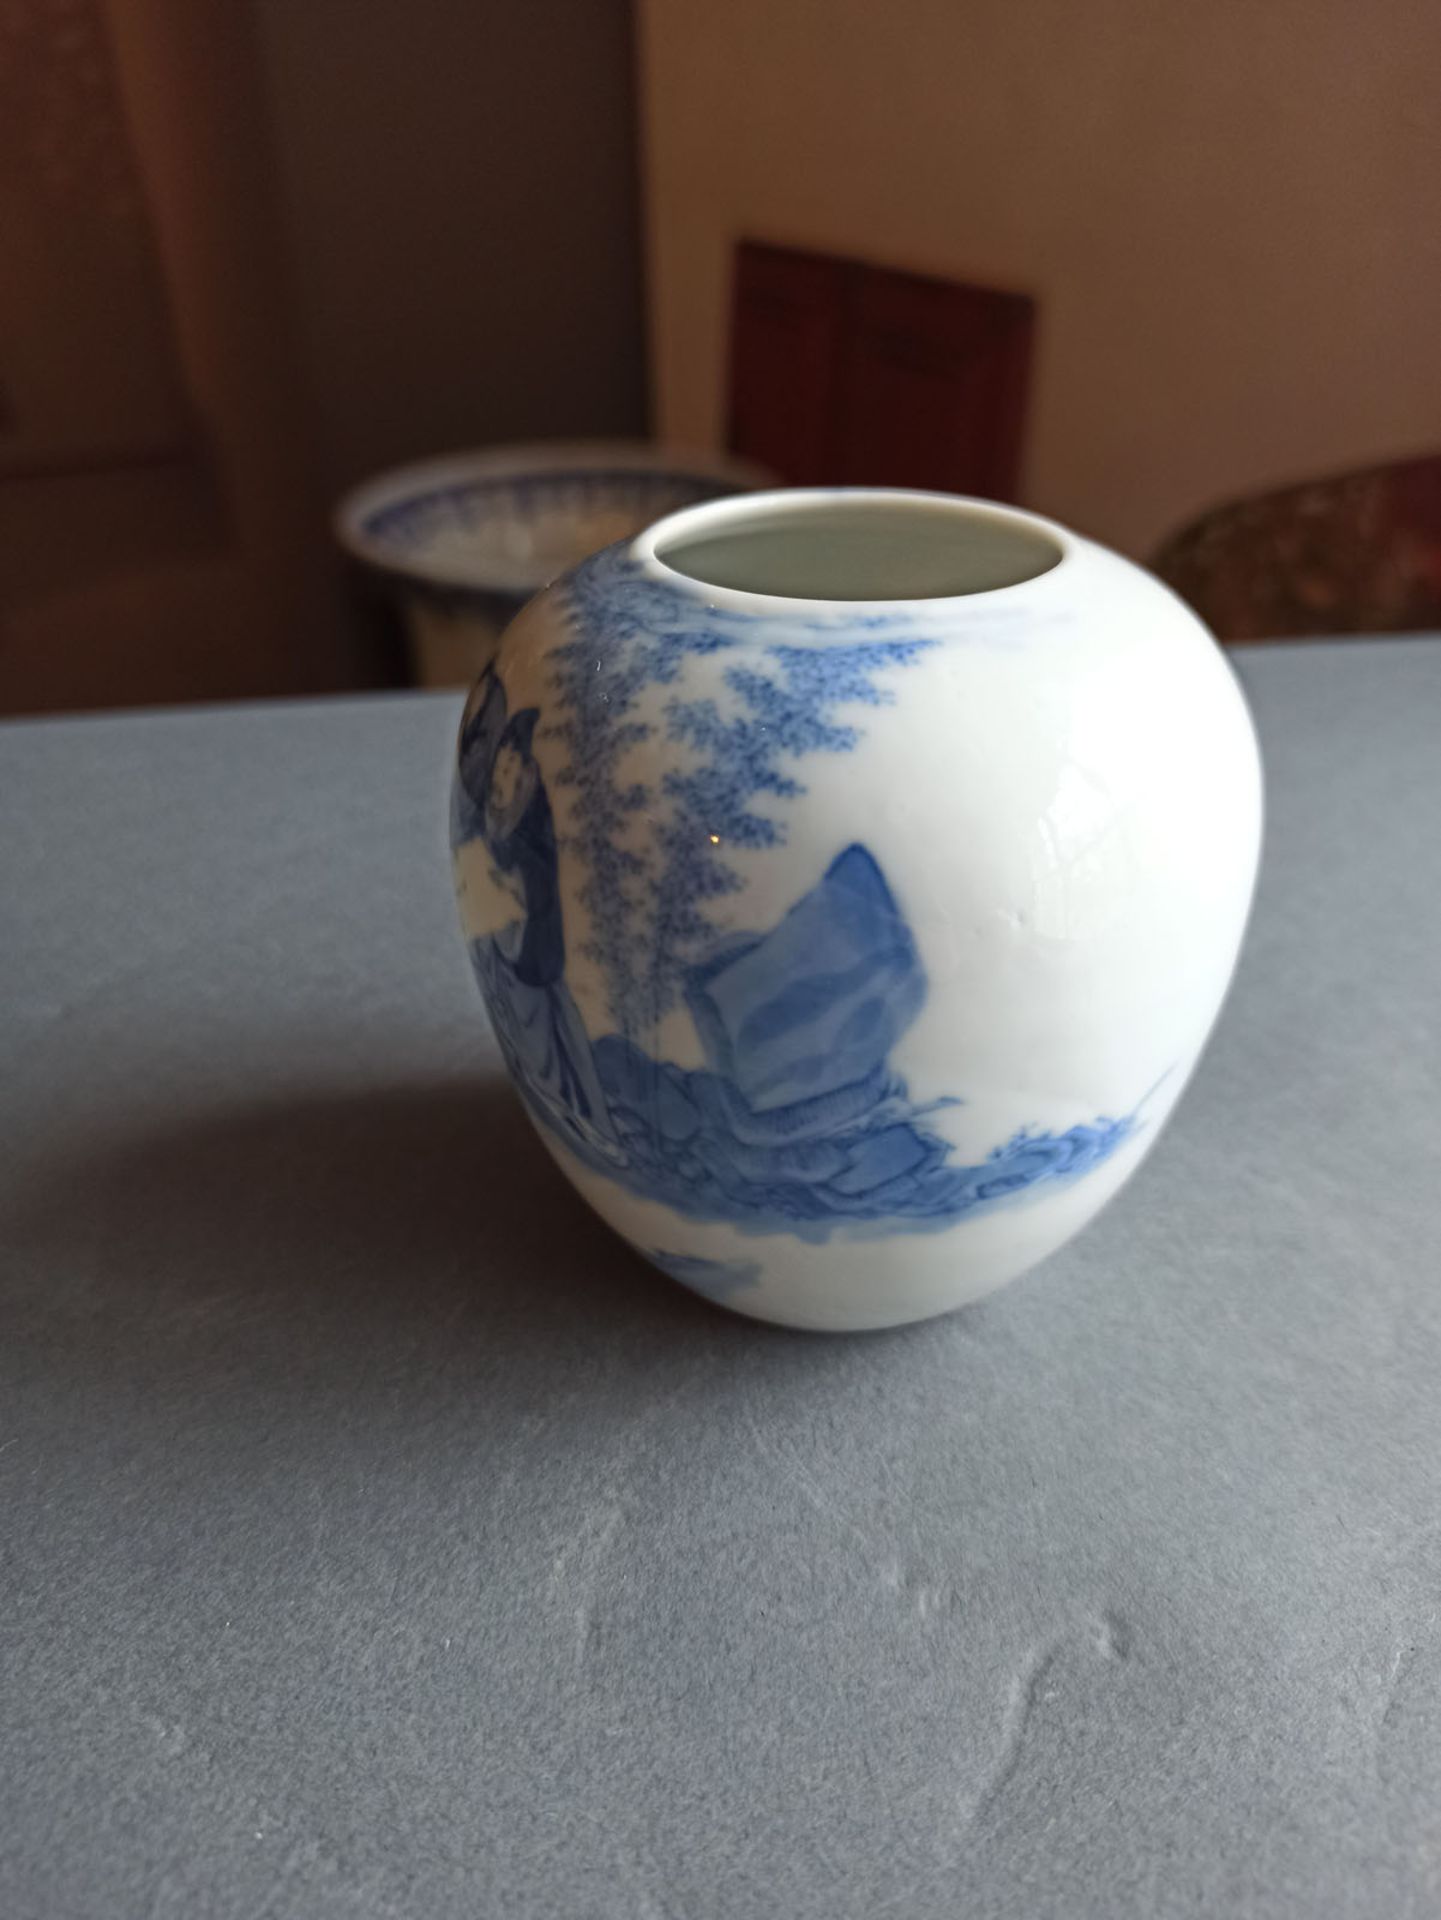 A GLOBULAR BLUE AND WHITE PORCELAIN WITH SCHIOLARS LOOKING AT A CALLIGRAPHY - Image 3 of 7